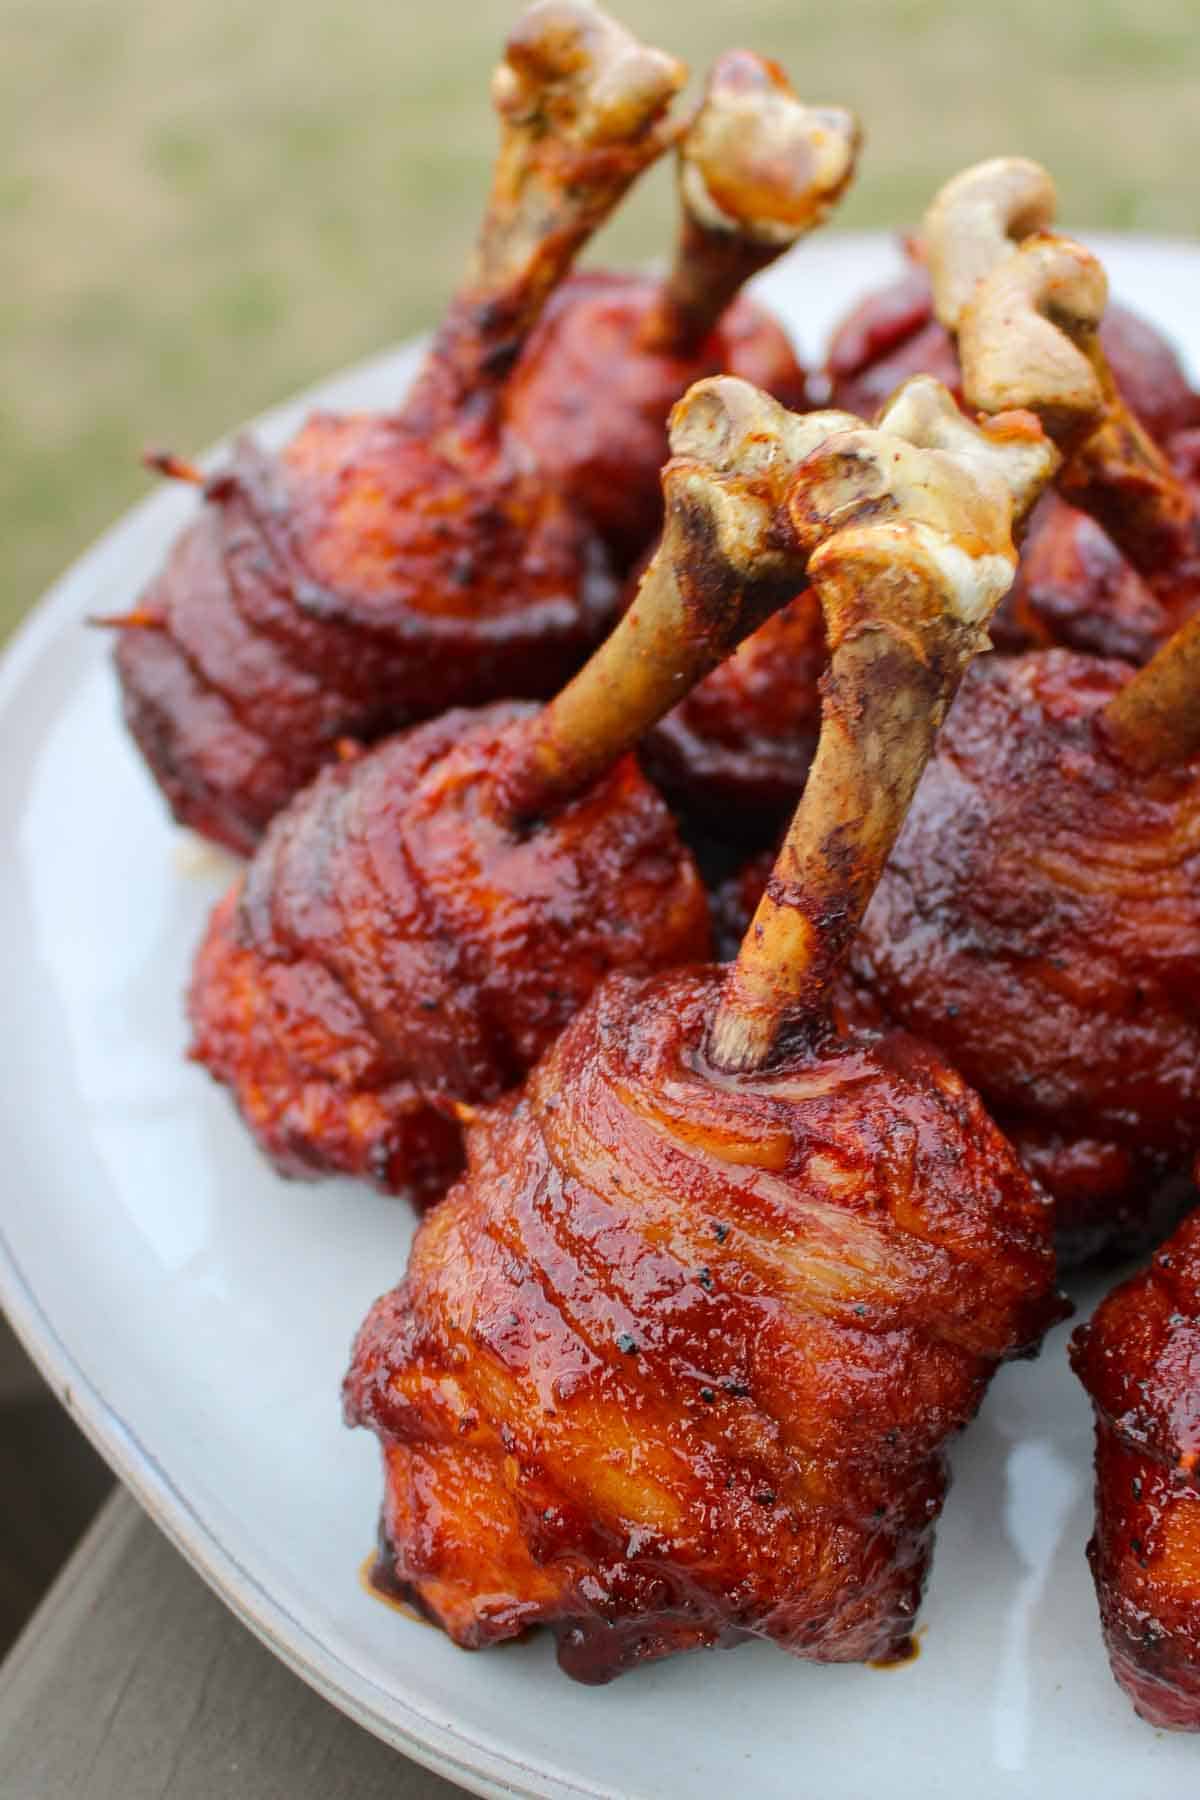 A close up shot of the finalized chicken lollipops.